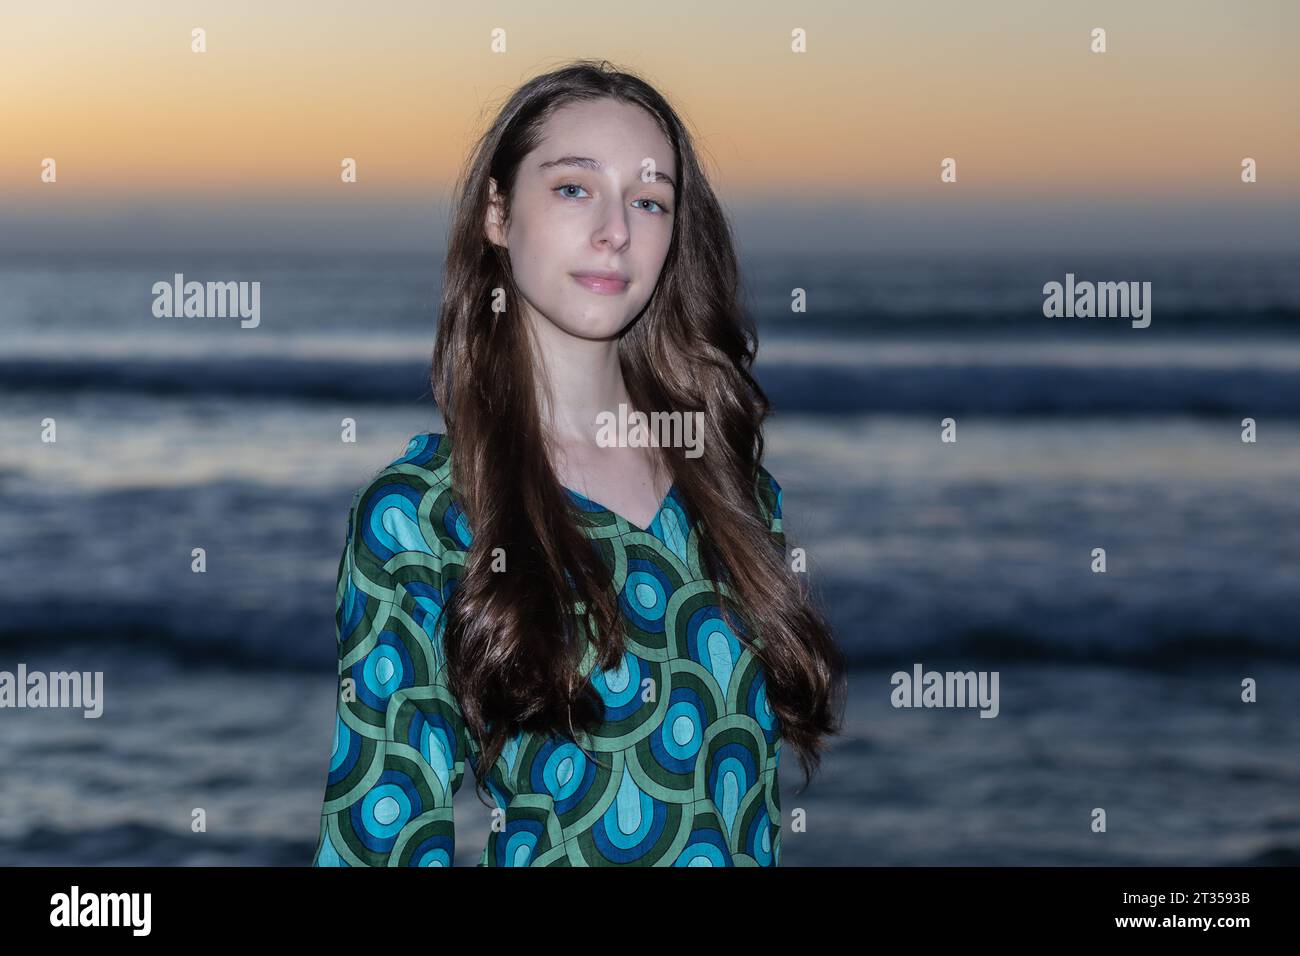 A 20-year-old Caucasian woman stands on the beach at sunset, wearing a vibrant and colorful patterned shirt dress as the sun casts a warm glow over th Stock Photo